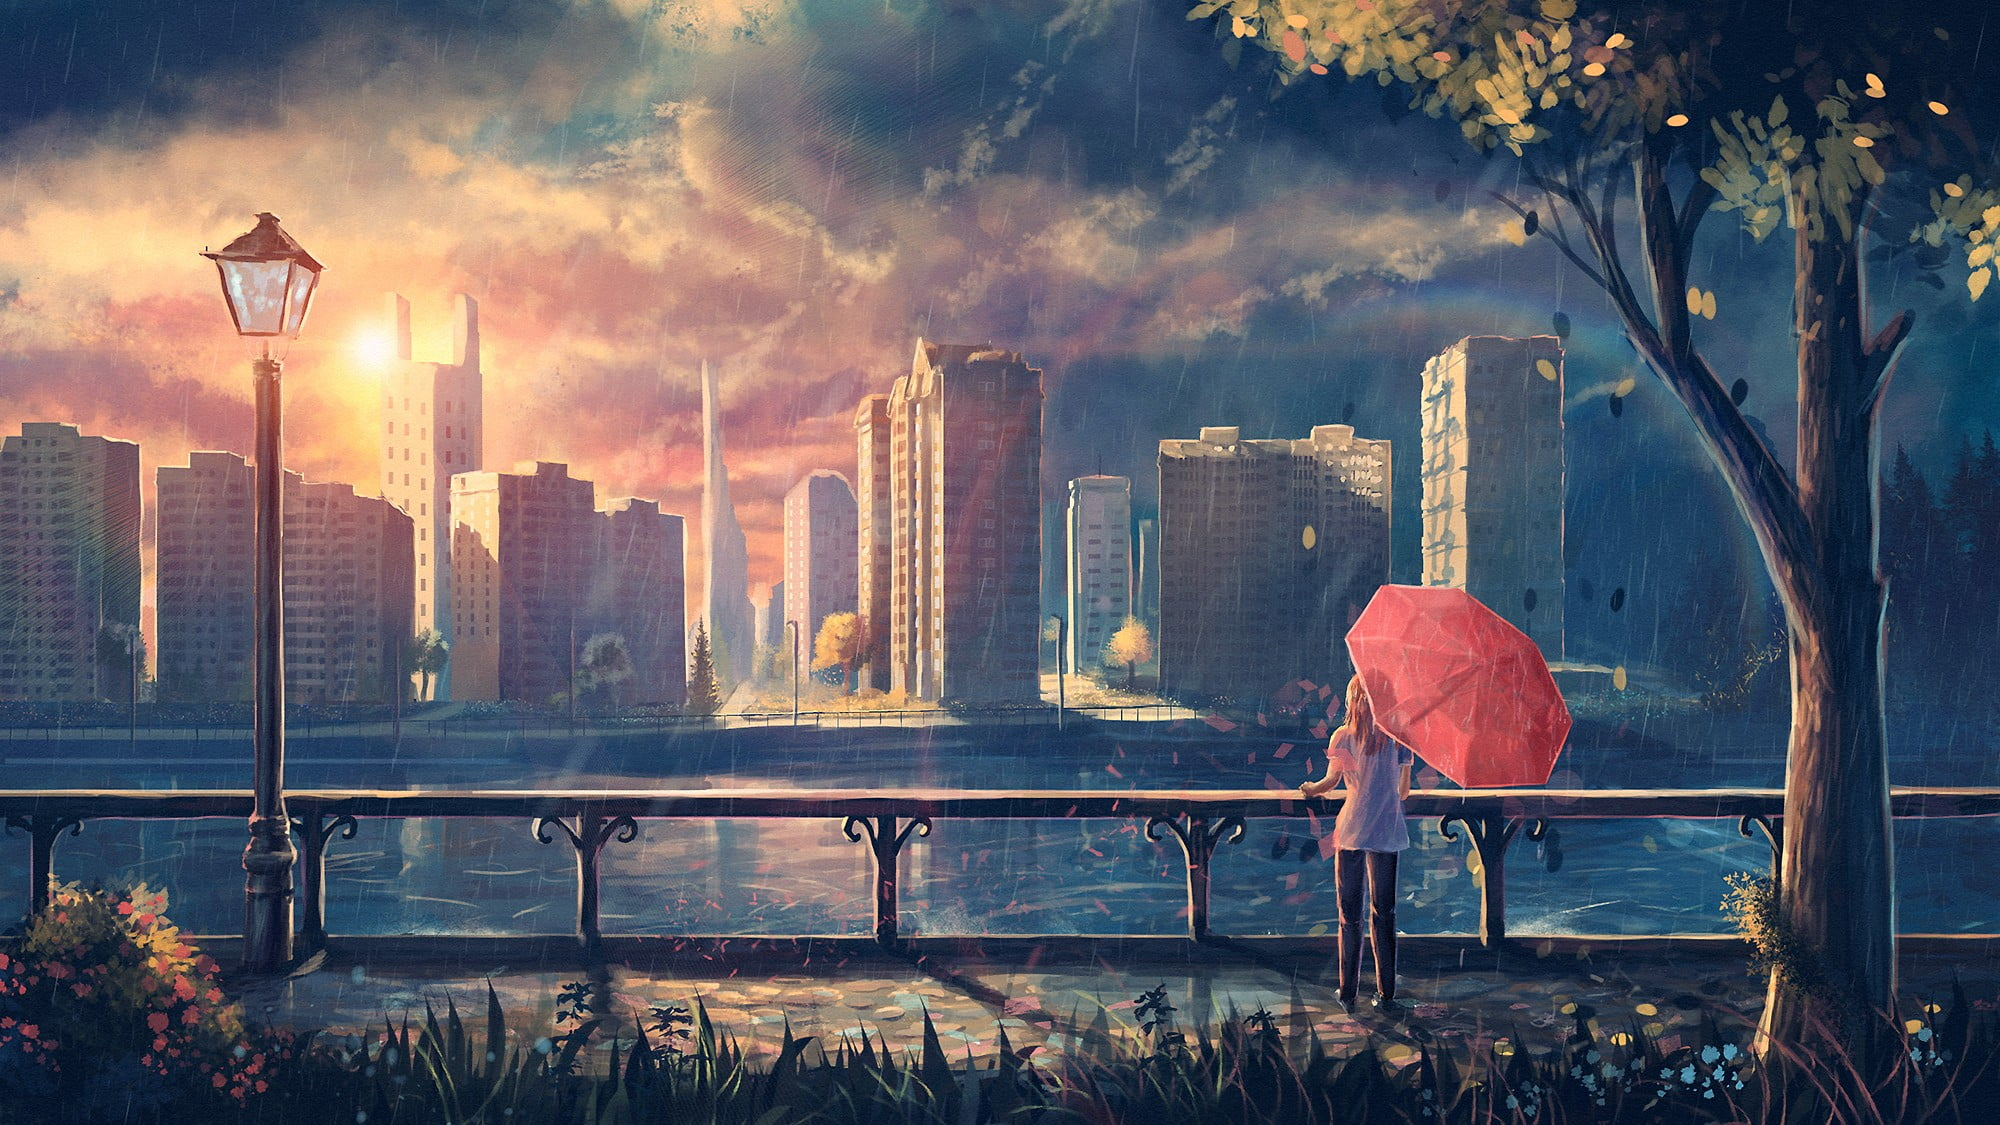 Woman holding umbrella looking building painting, woman using pink umbrella watching the body of water and buildings